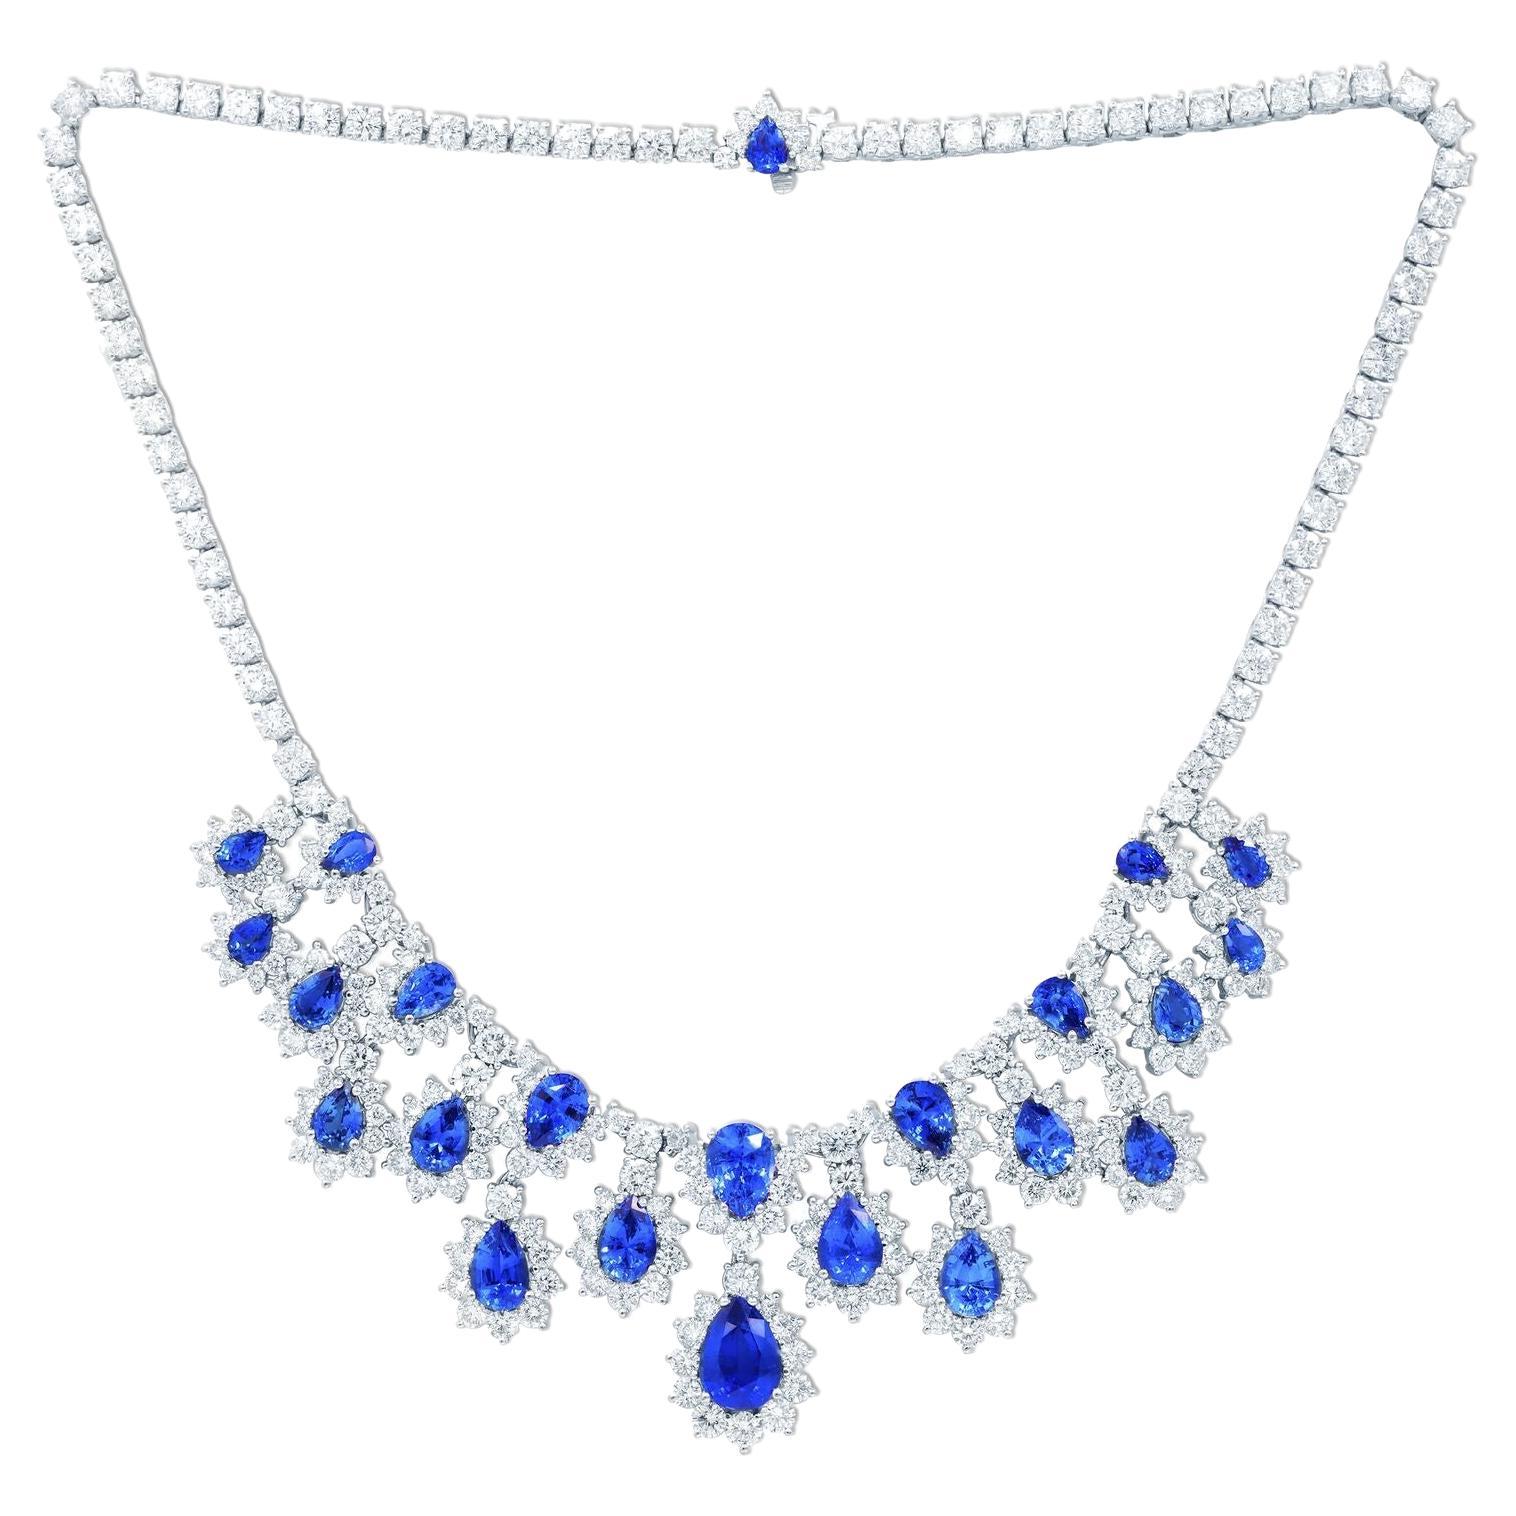 Diana M. 27.36 Carat Pear Cut Sapphire and Diamond Necklace For Sale